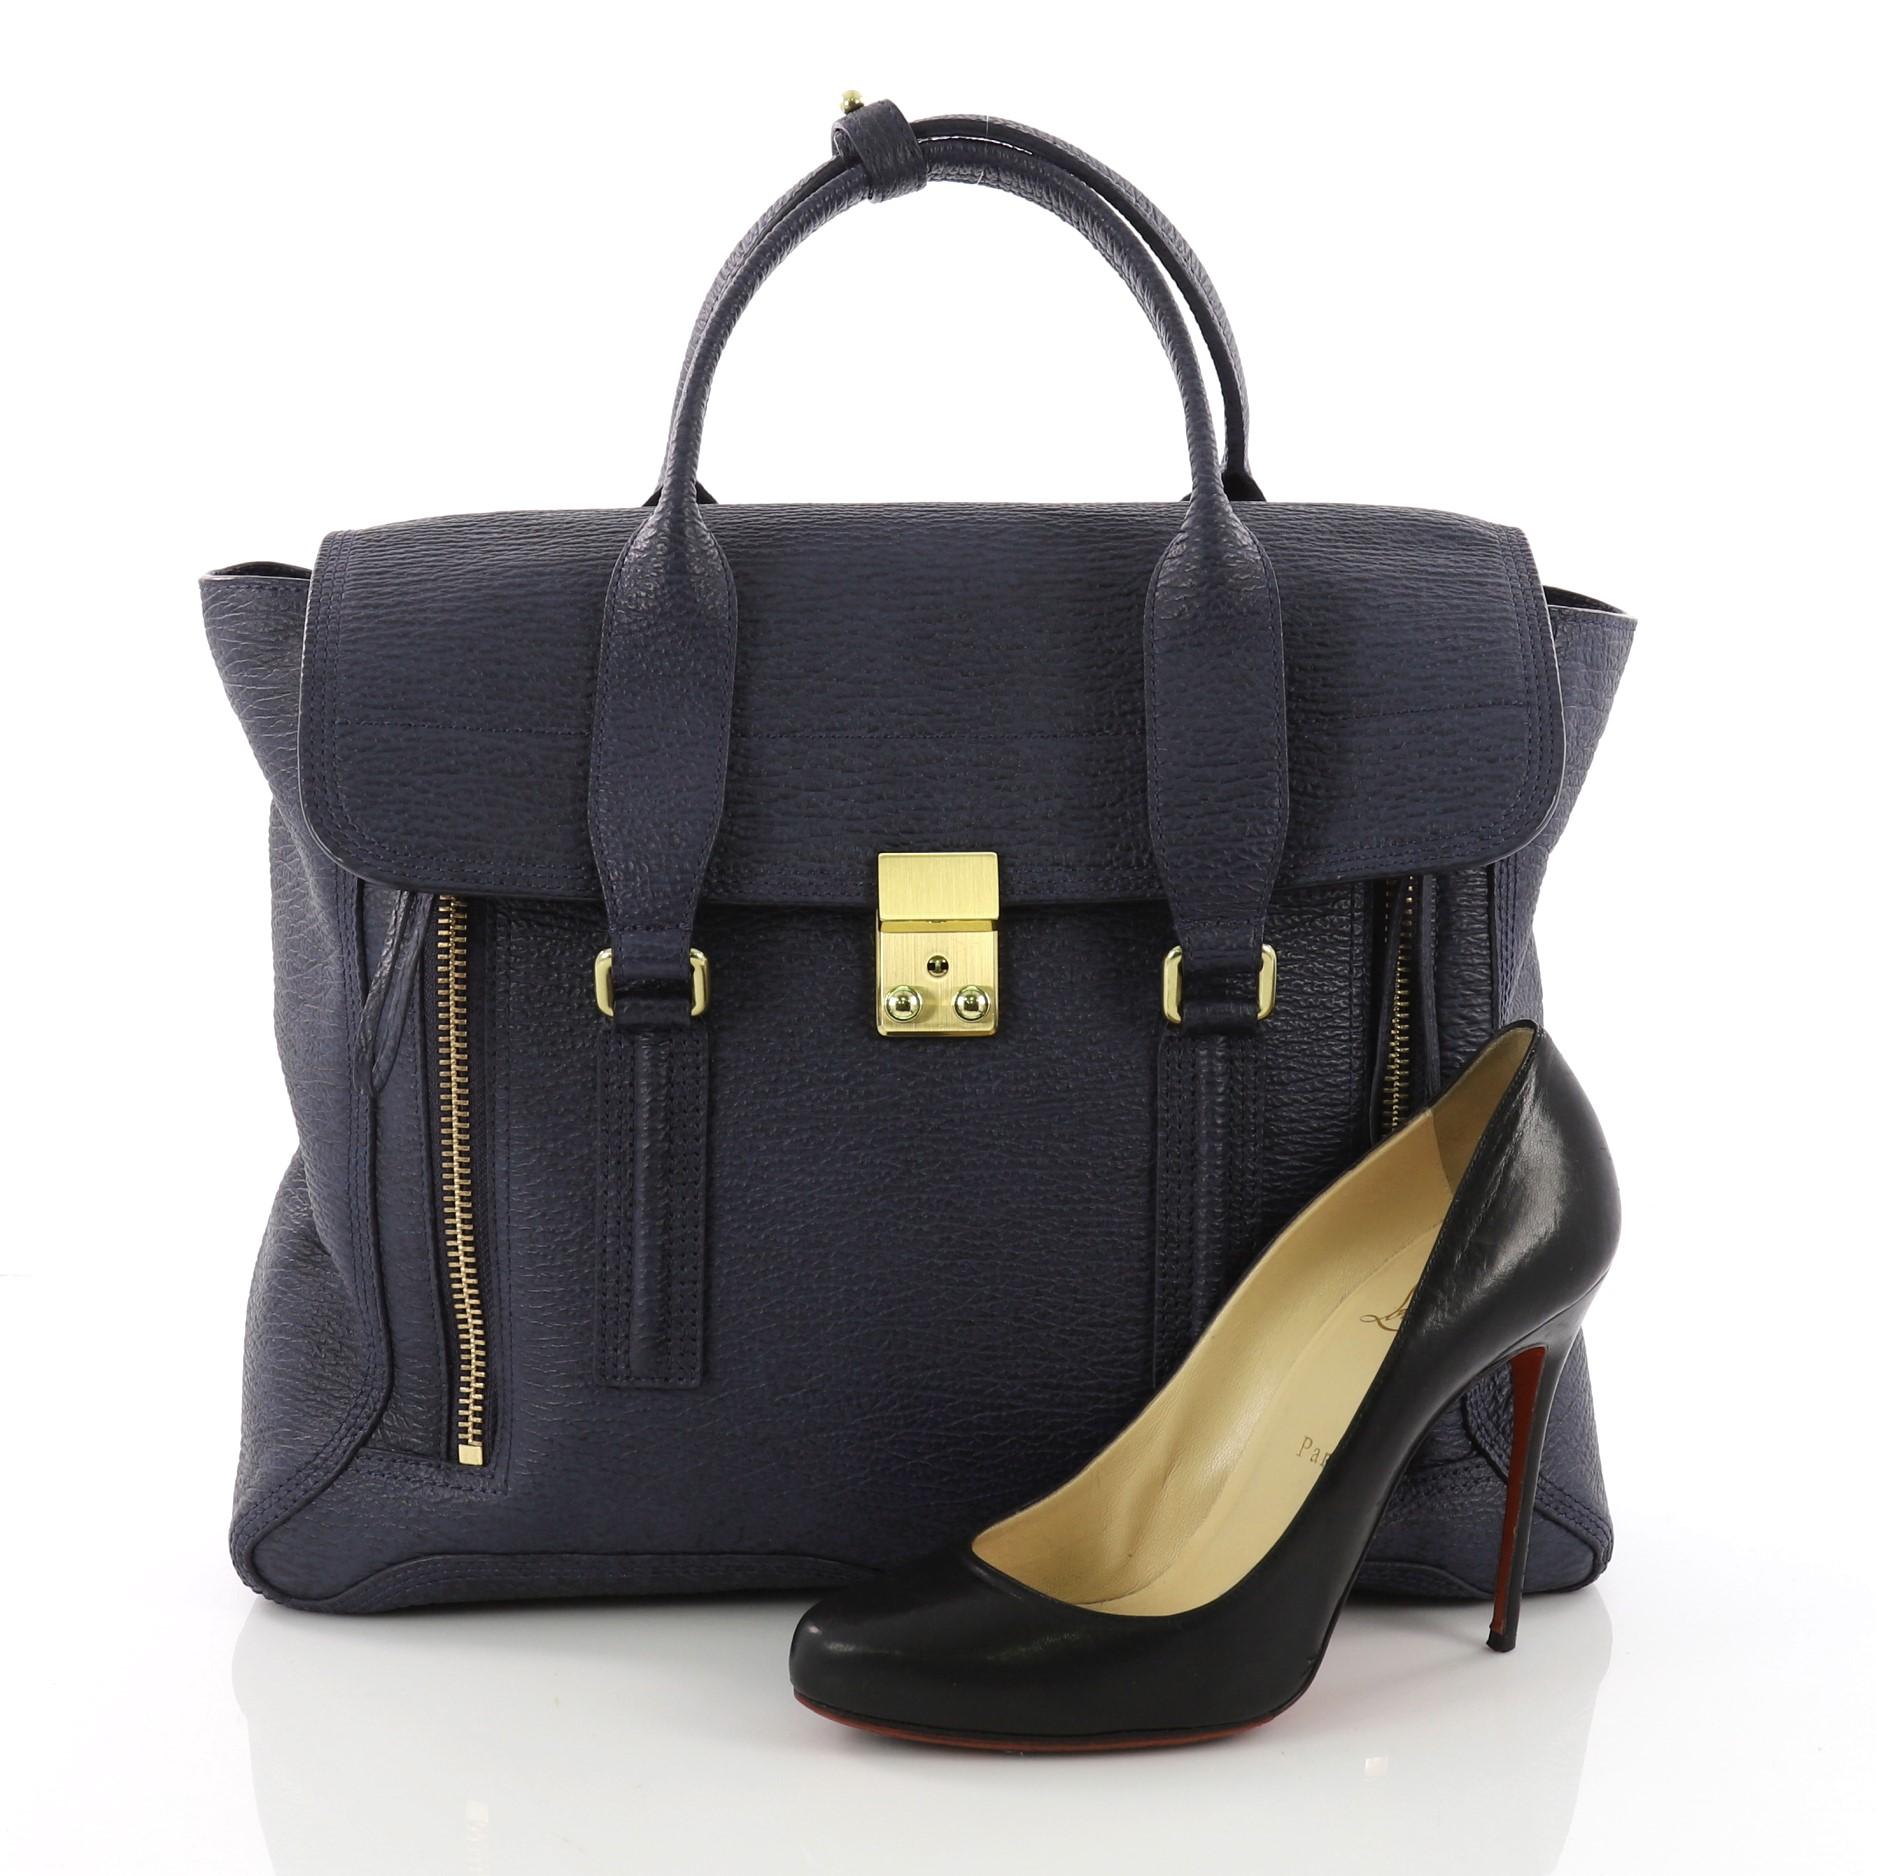 This 3.1 Phillip Lim Pashli Satchel Leather Large, crafted from blue leather, features dual top handles and gold-tone hardware. Its top flap push-lock closure opens to a blue fabric interior with side zip pocket. **Note: Shoe photographed is used as